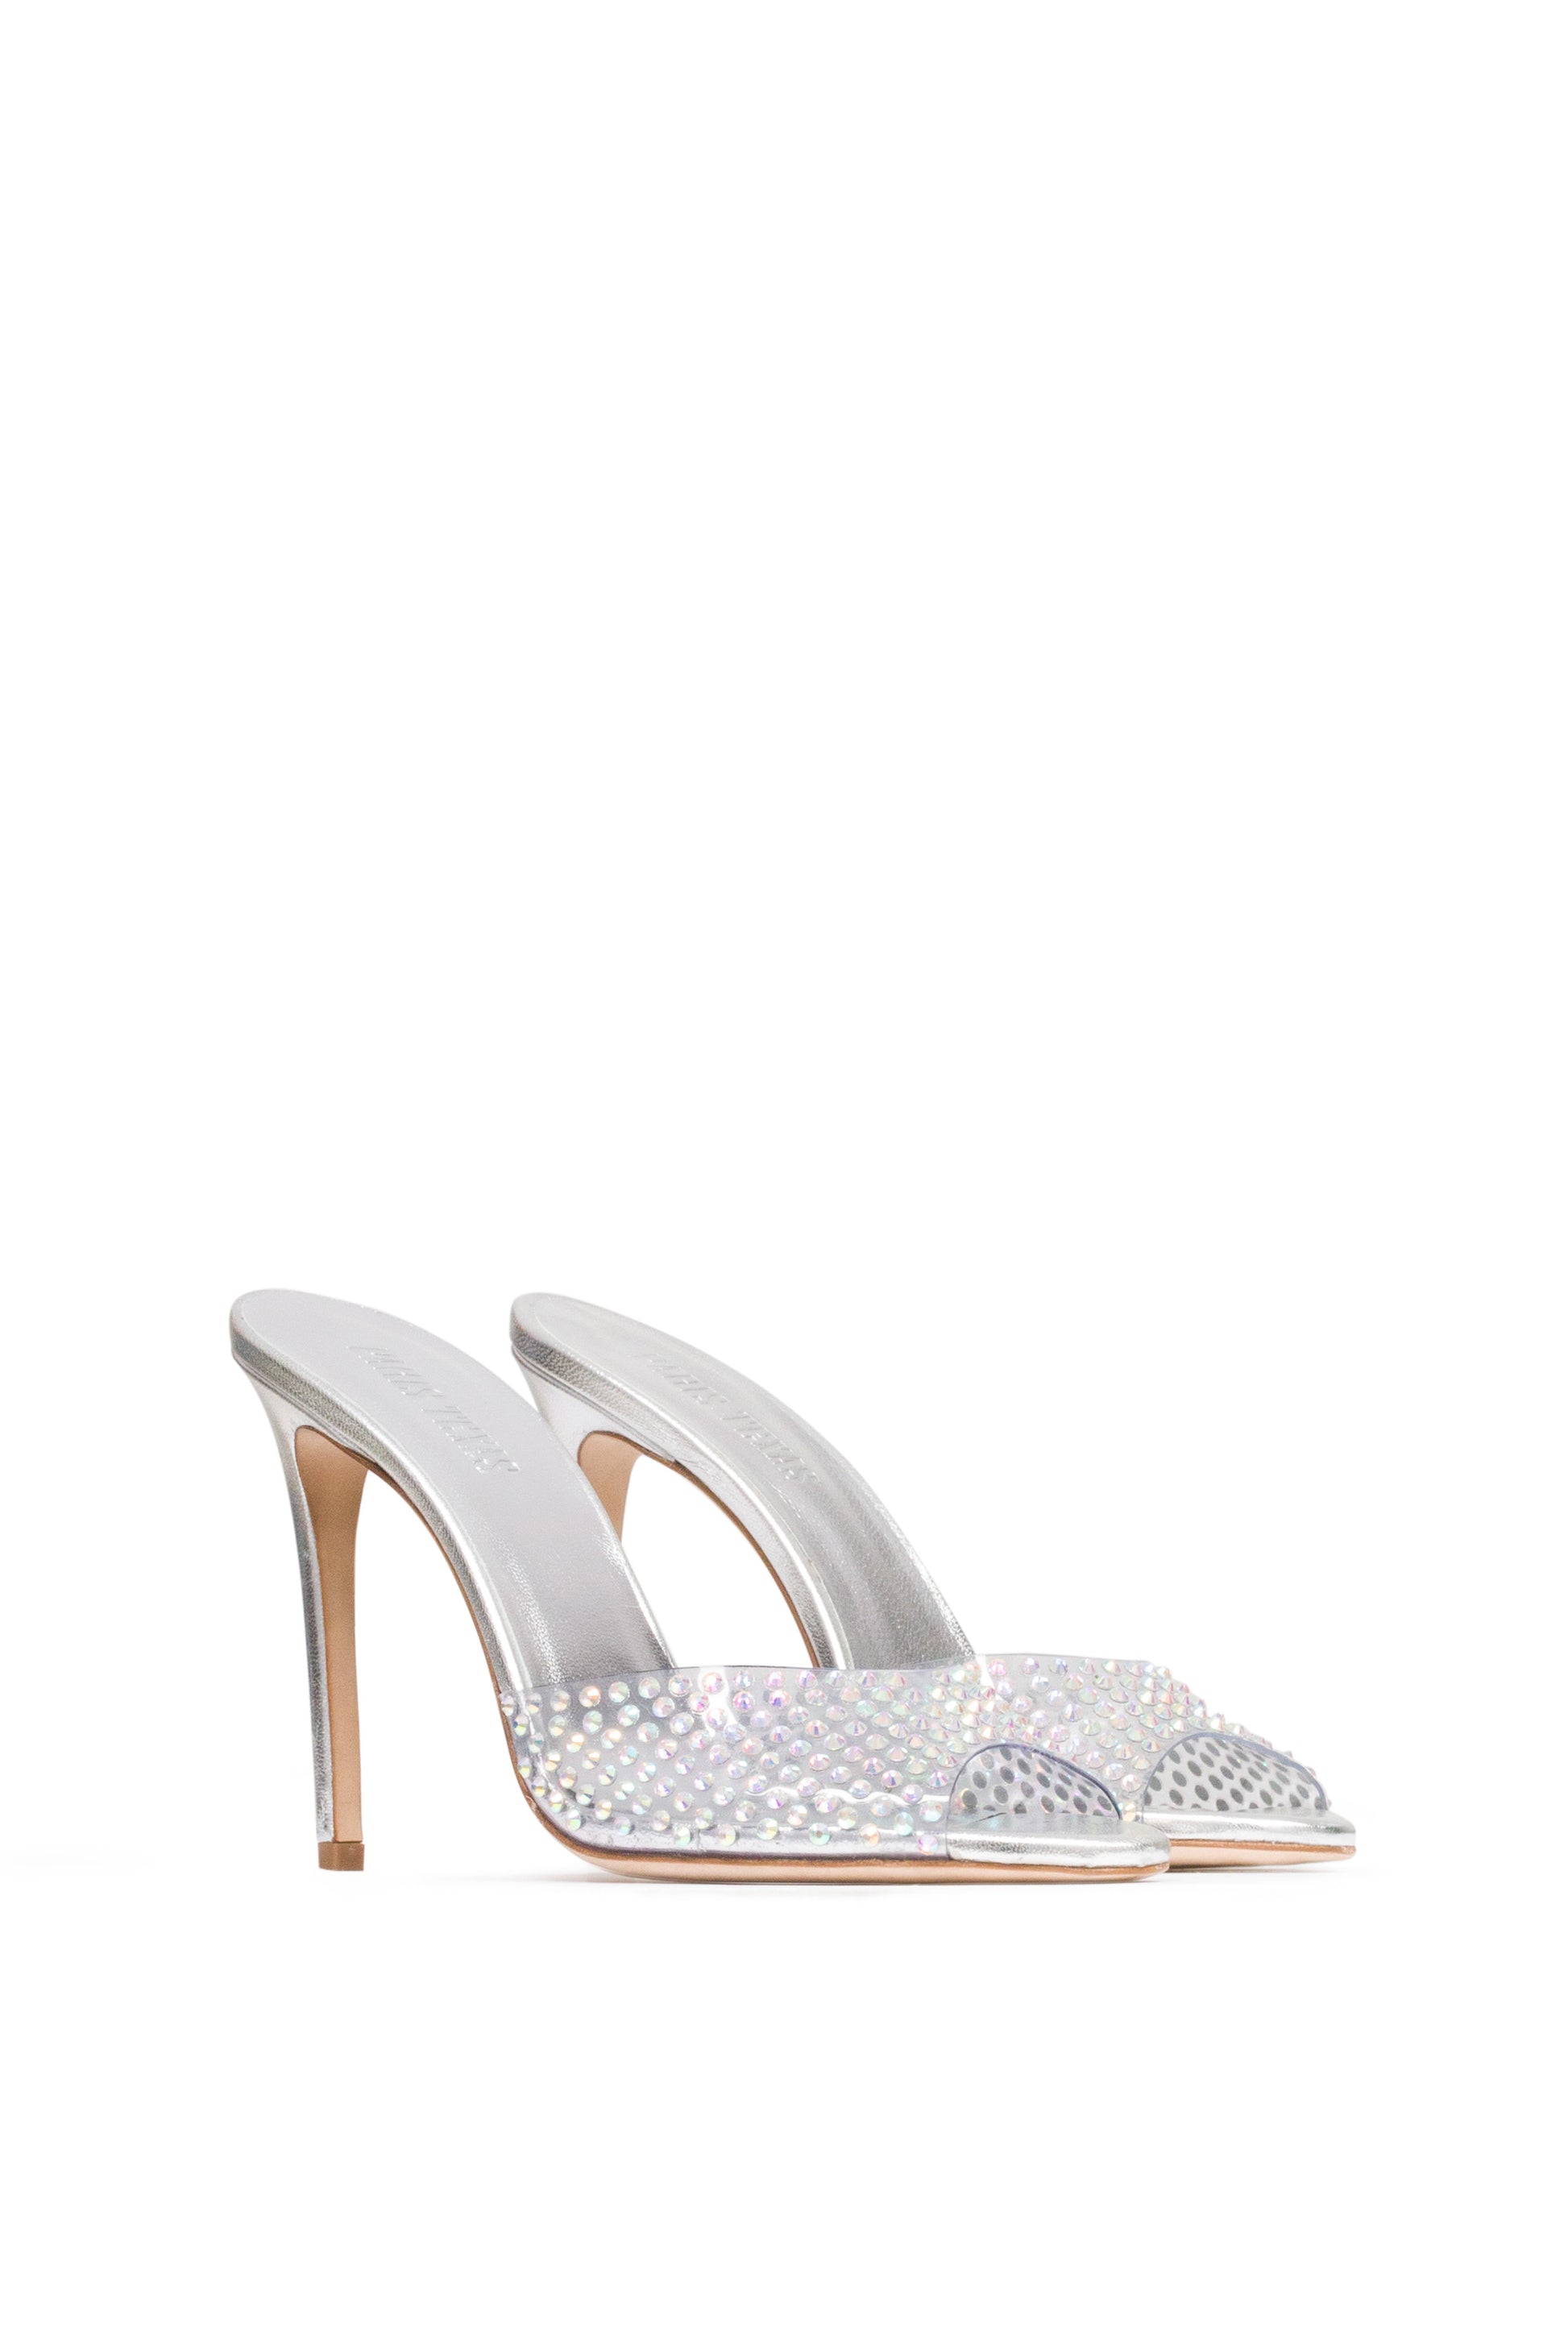 Embellished clear pvc mules - Front